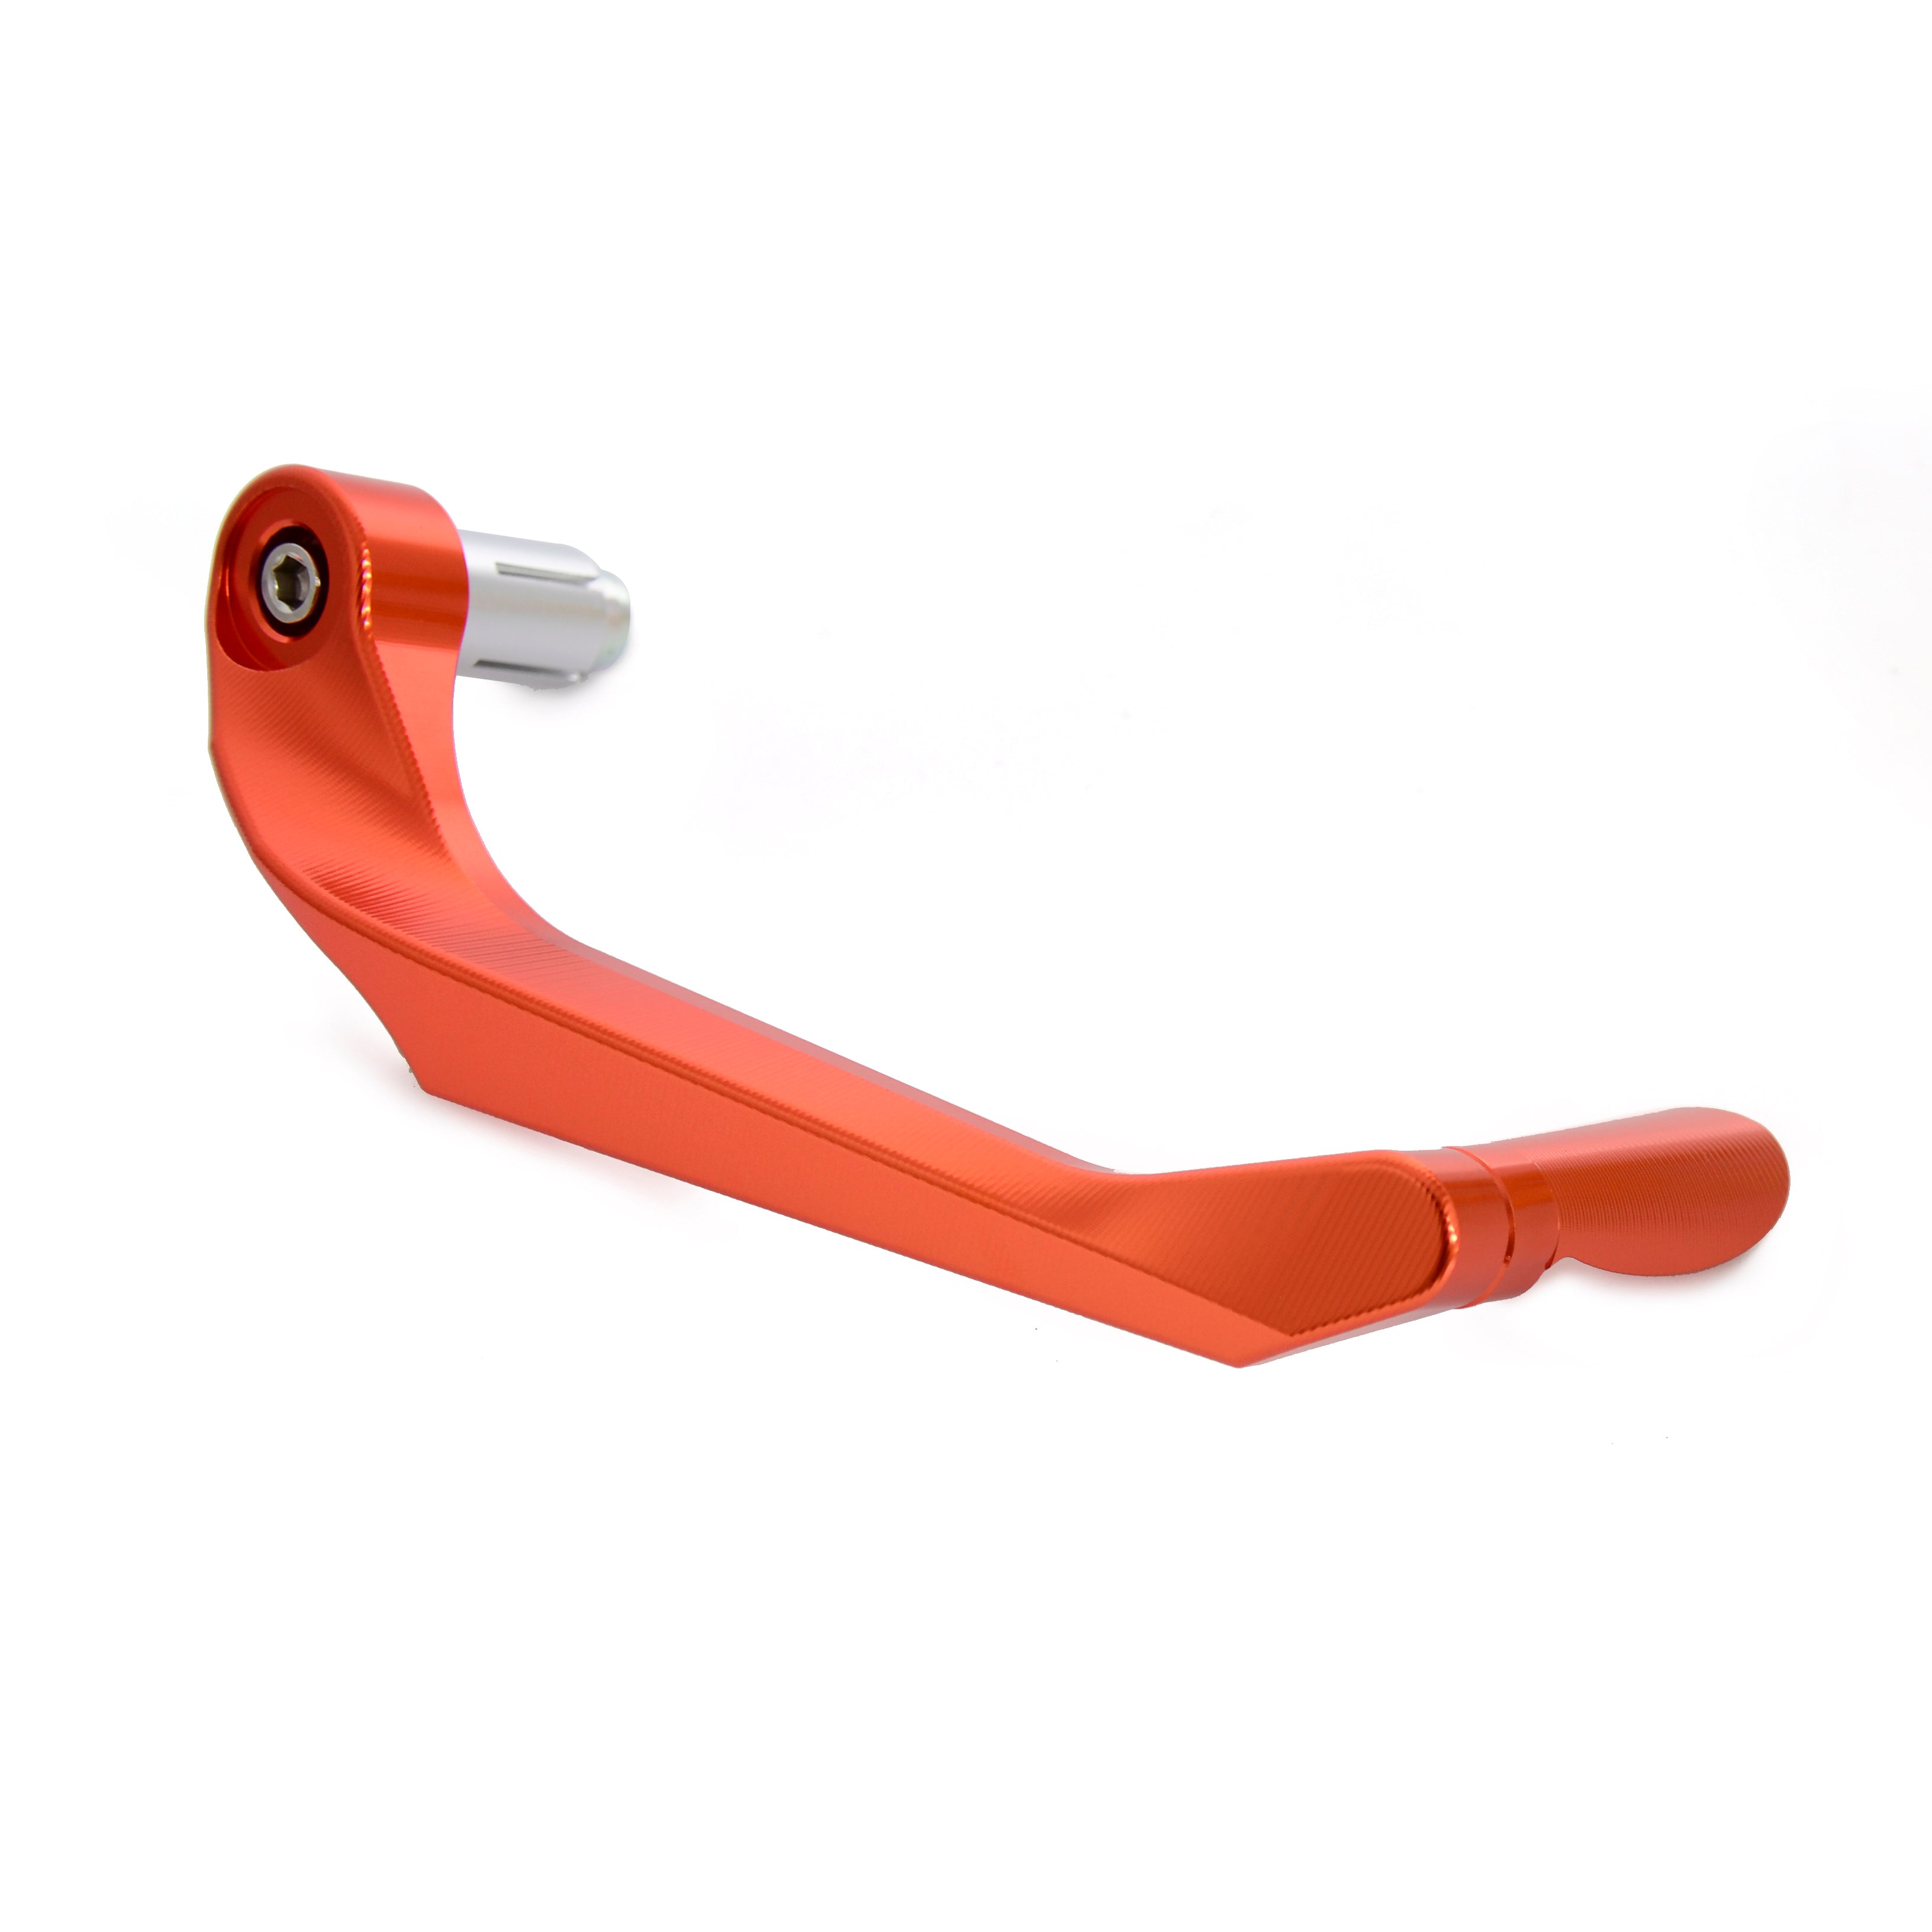 Brake Clutch Lever Guard Bar End Protector Universial for Motorcycle 7/8" Handle